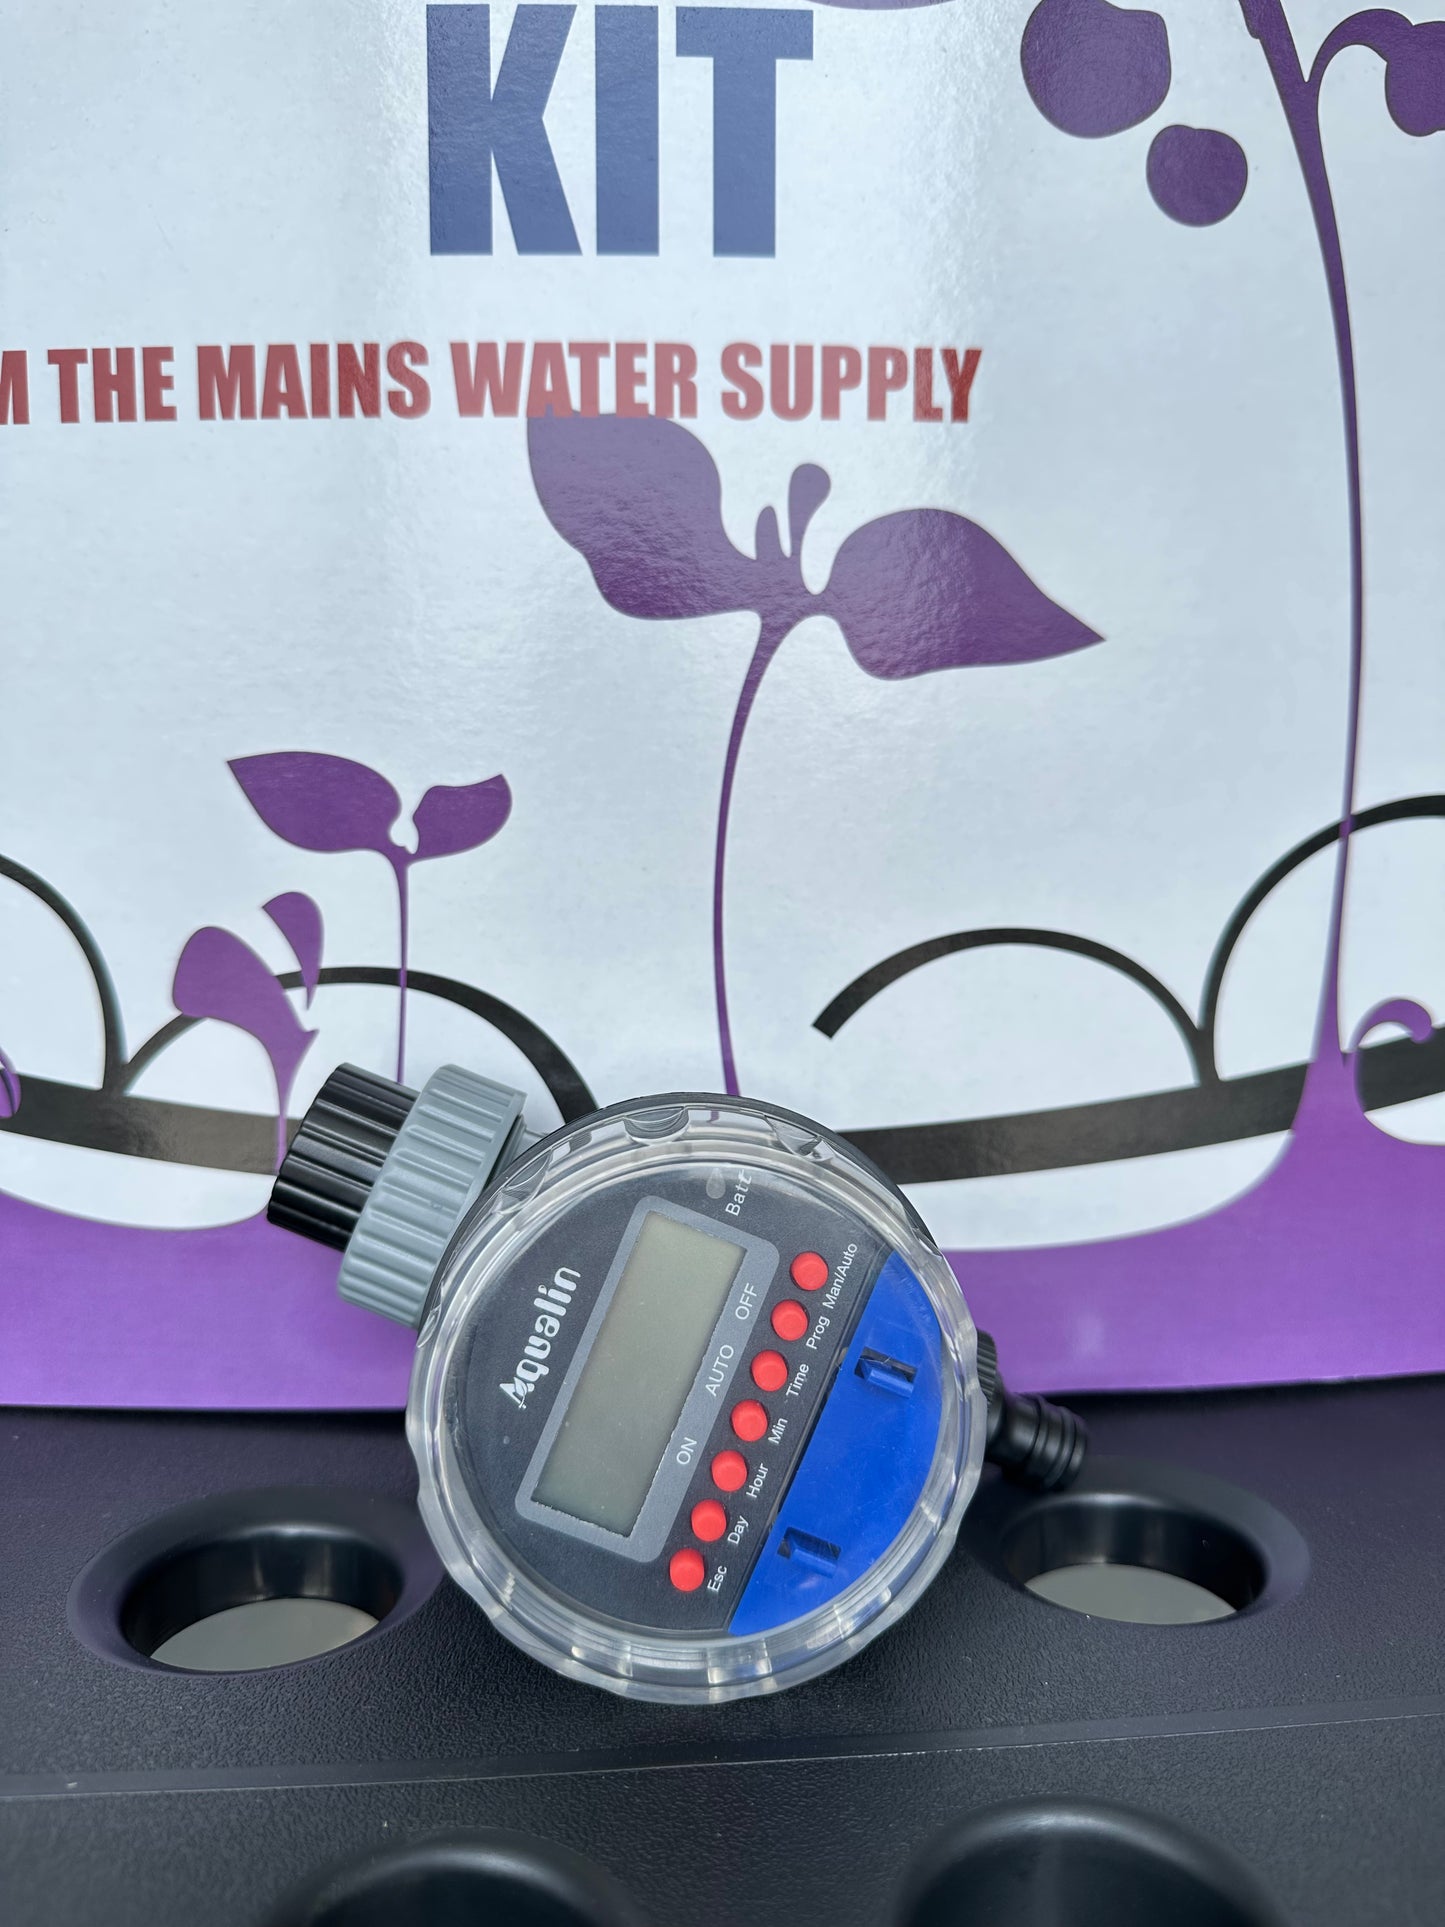 AQUADROP DRIP IRRIGATION SYSTEM from the mains water supply with Timer